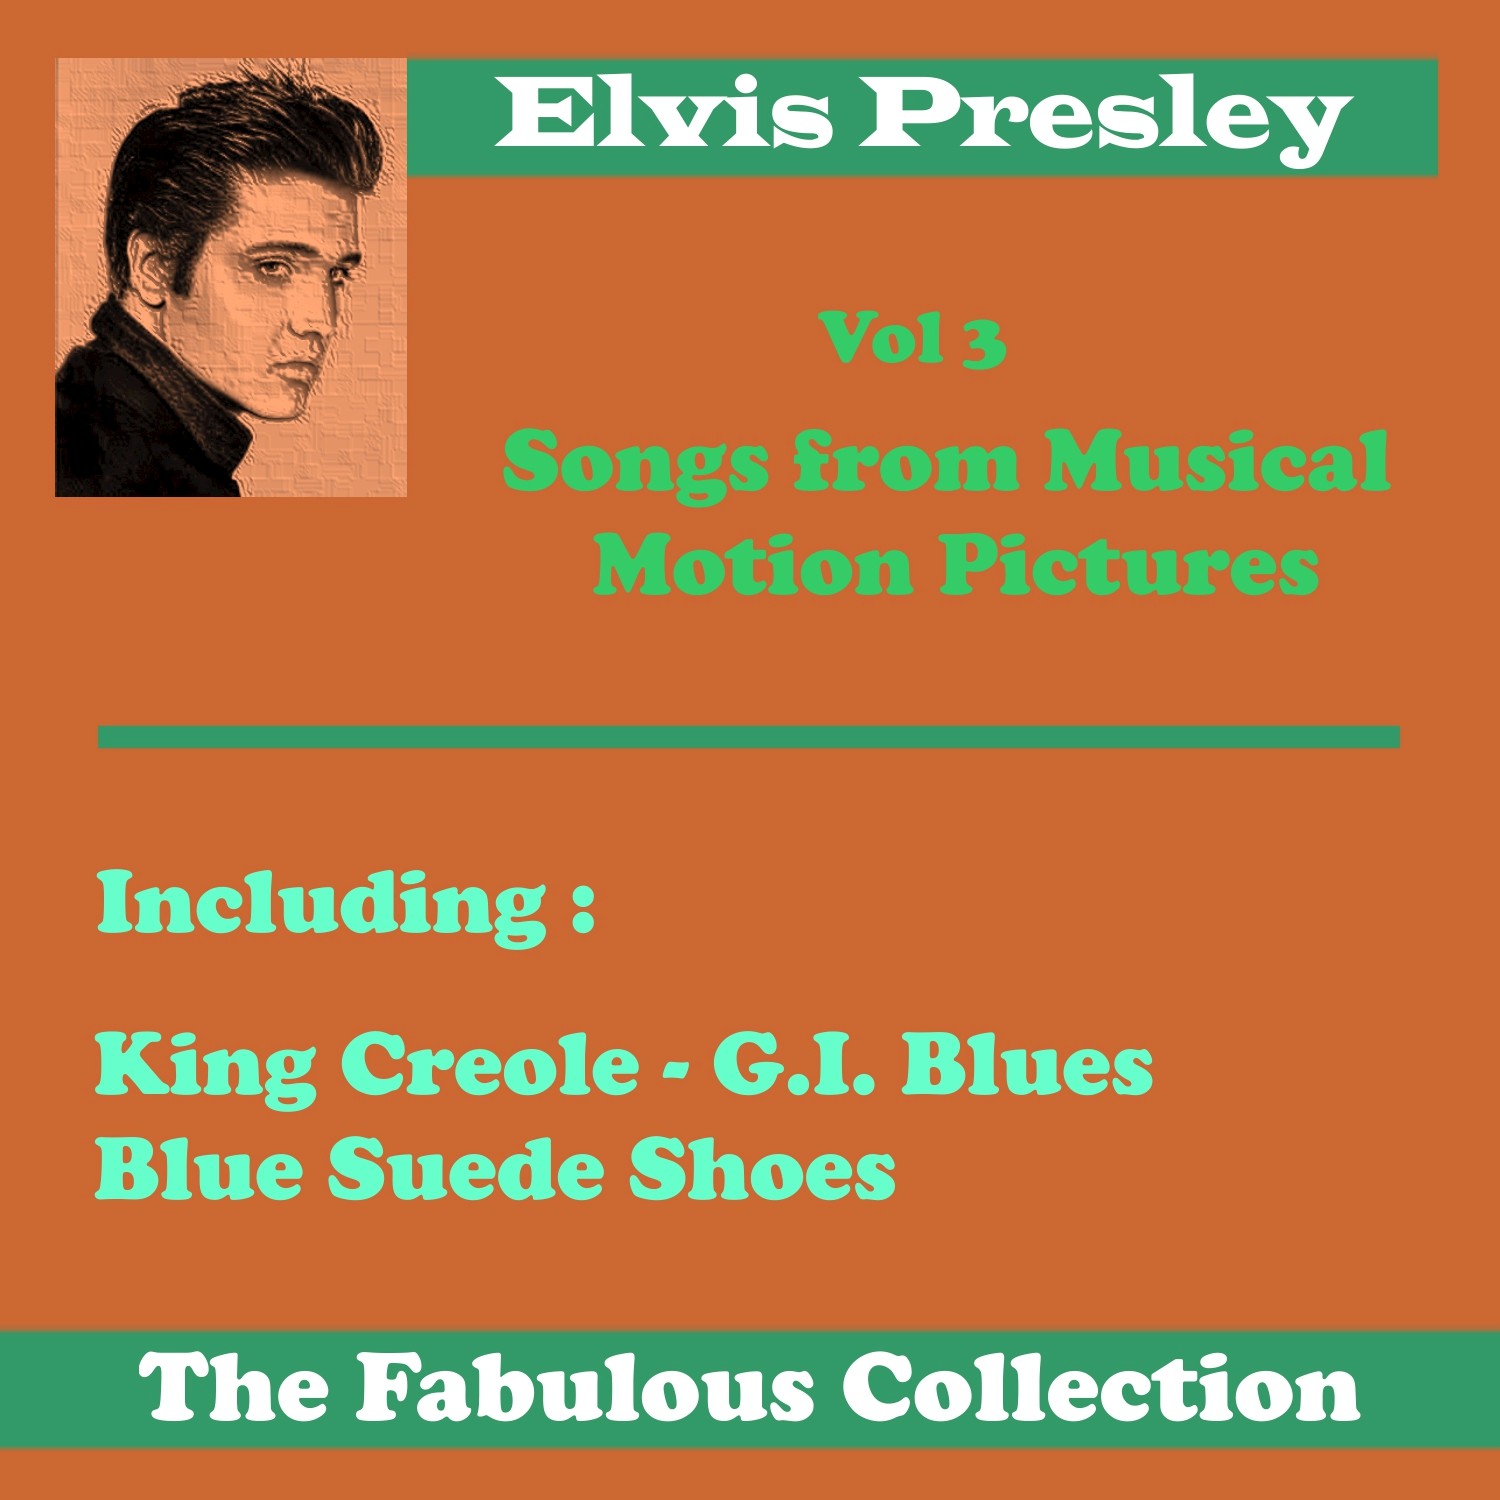 Elvis Presley the Fabulous Collection, Vol. 3 - Songs from Musical Motion Pictures